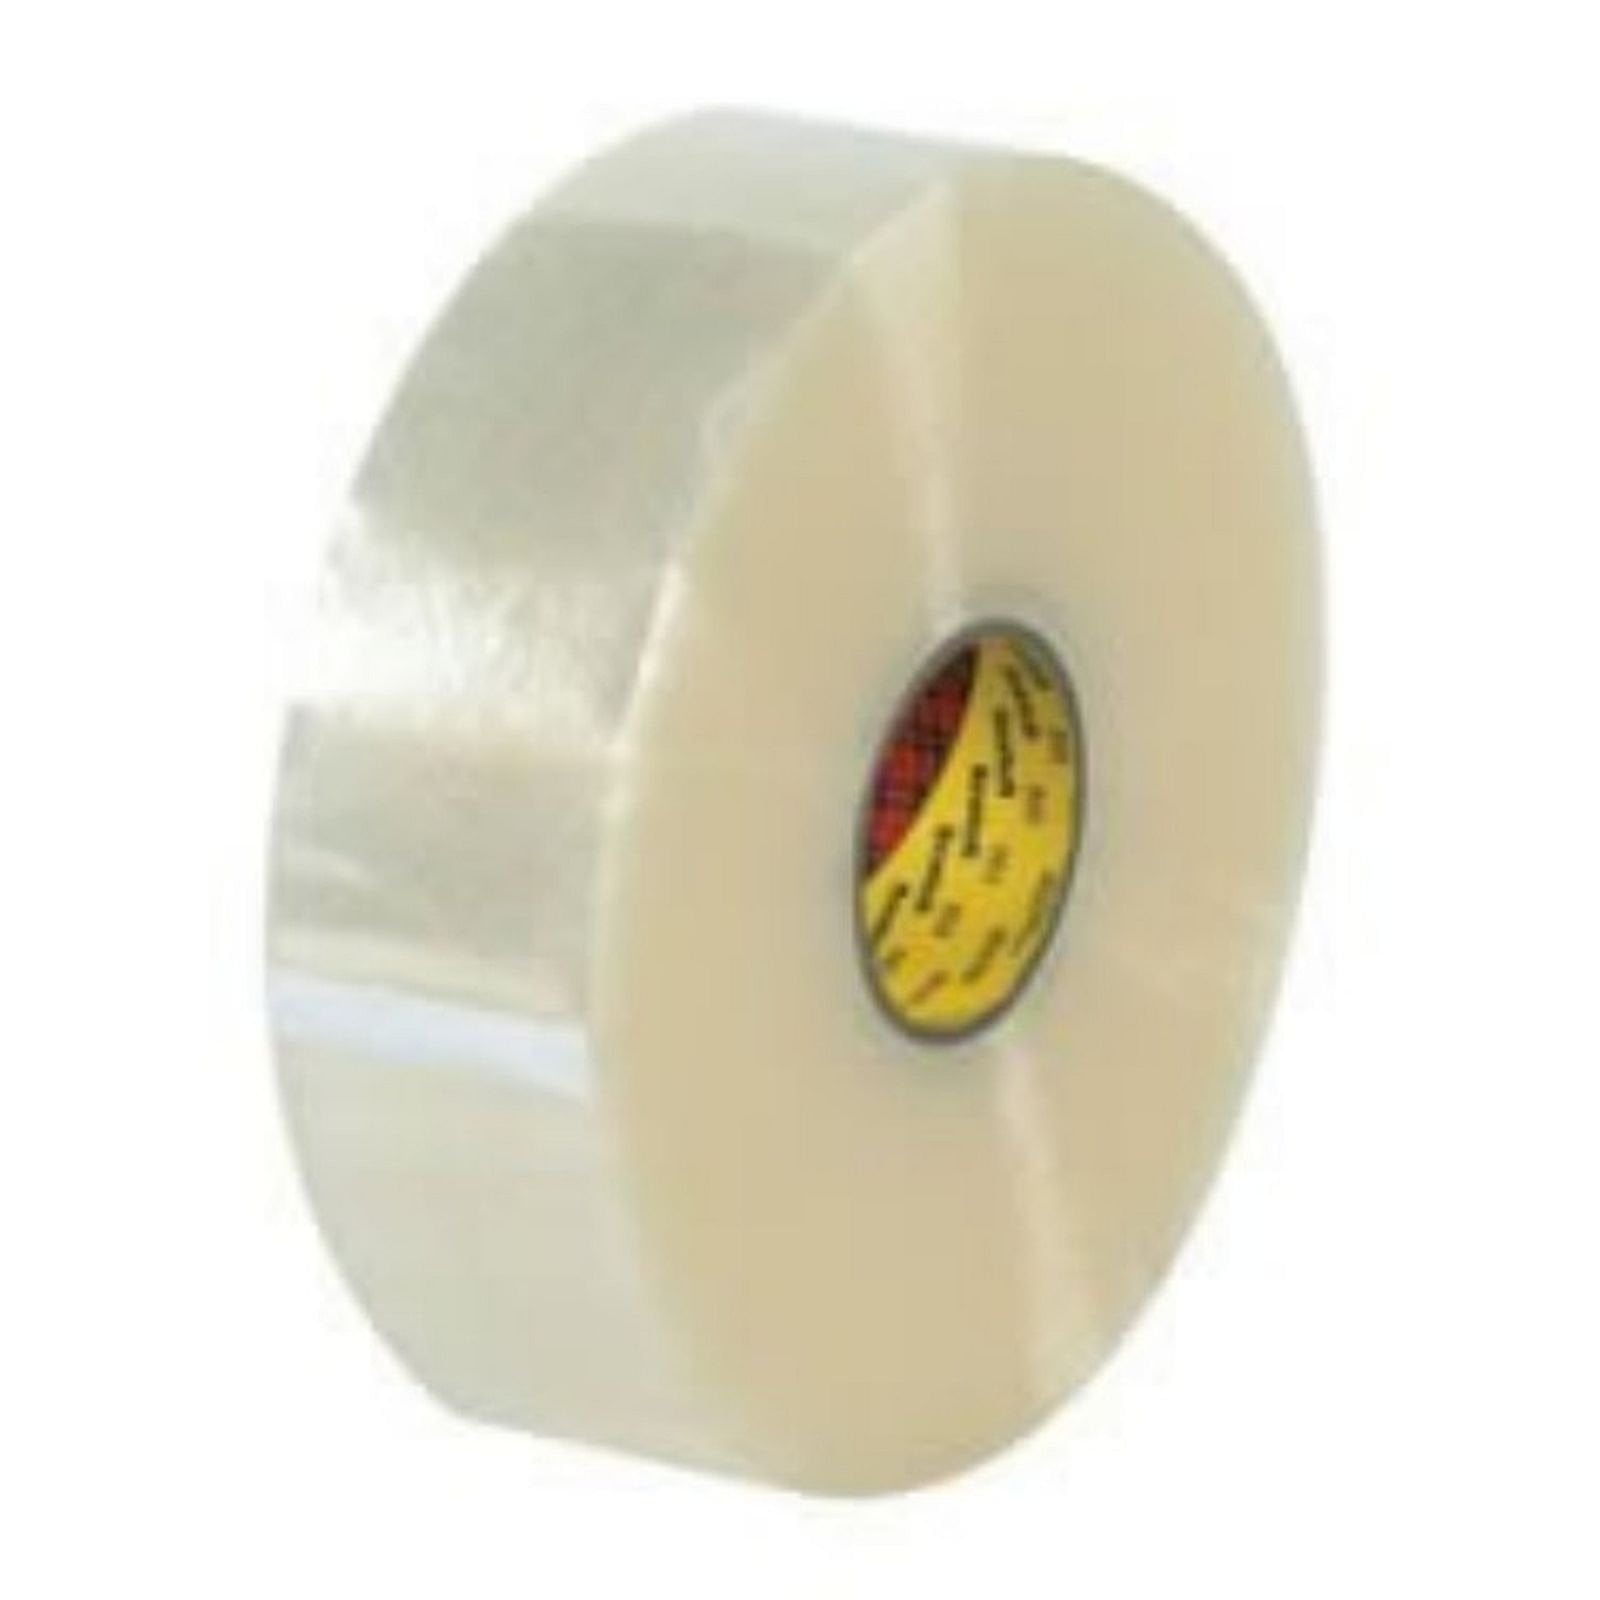 PACKING TAPE 48MM X 66M FREE 24HR DEL 6 ROLLS 3M SCOTCH 371 CLEAR PACKAGING 